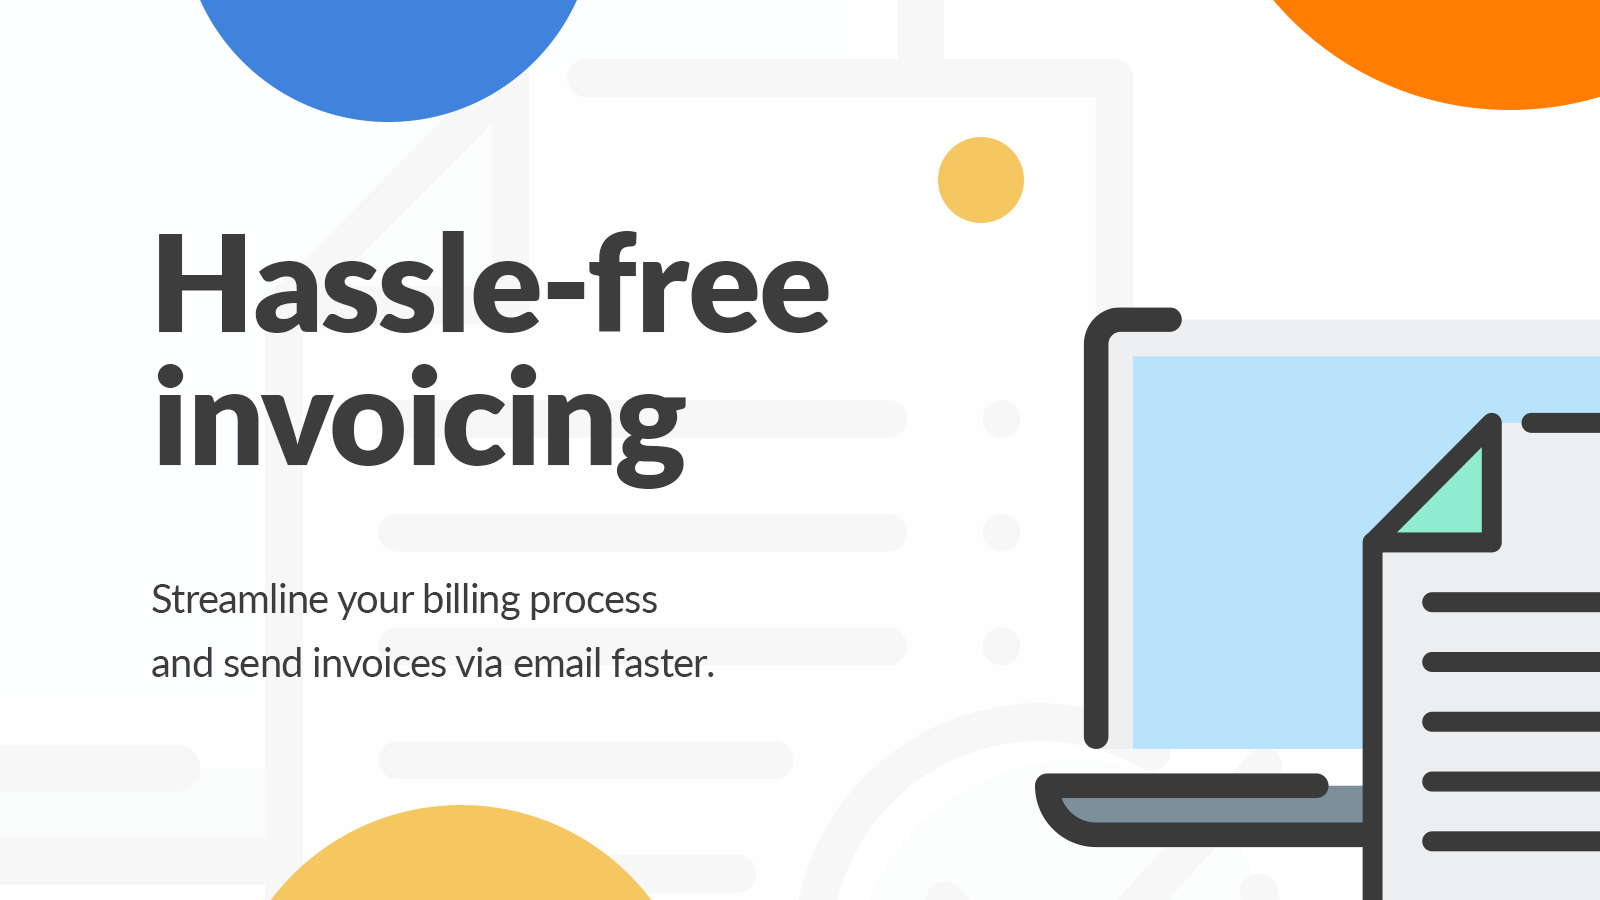 Hassle-free invoicing